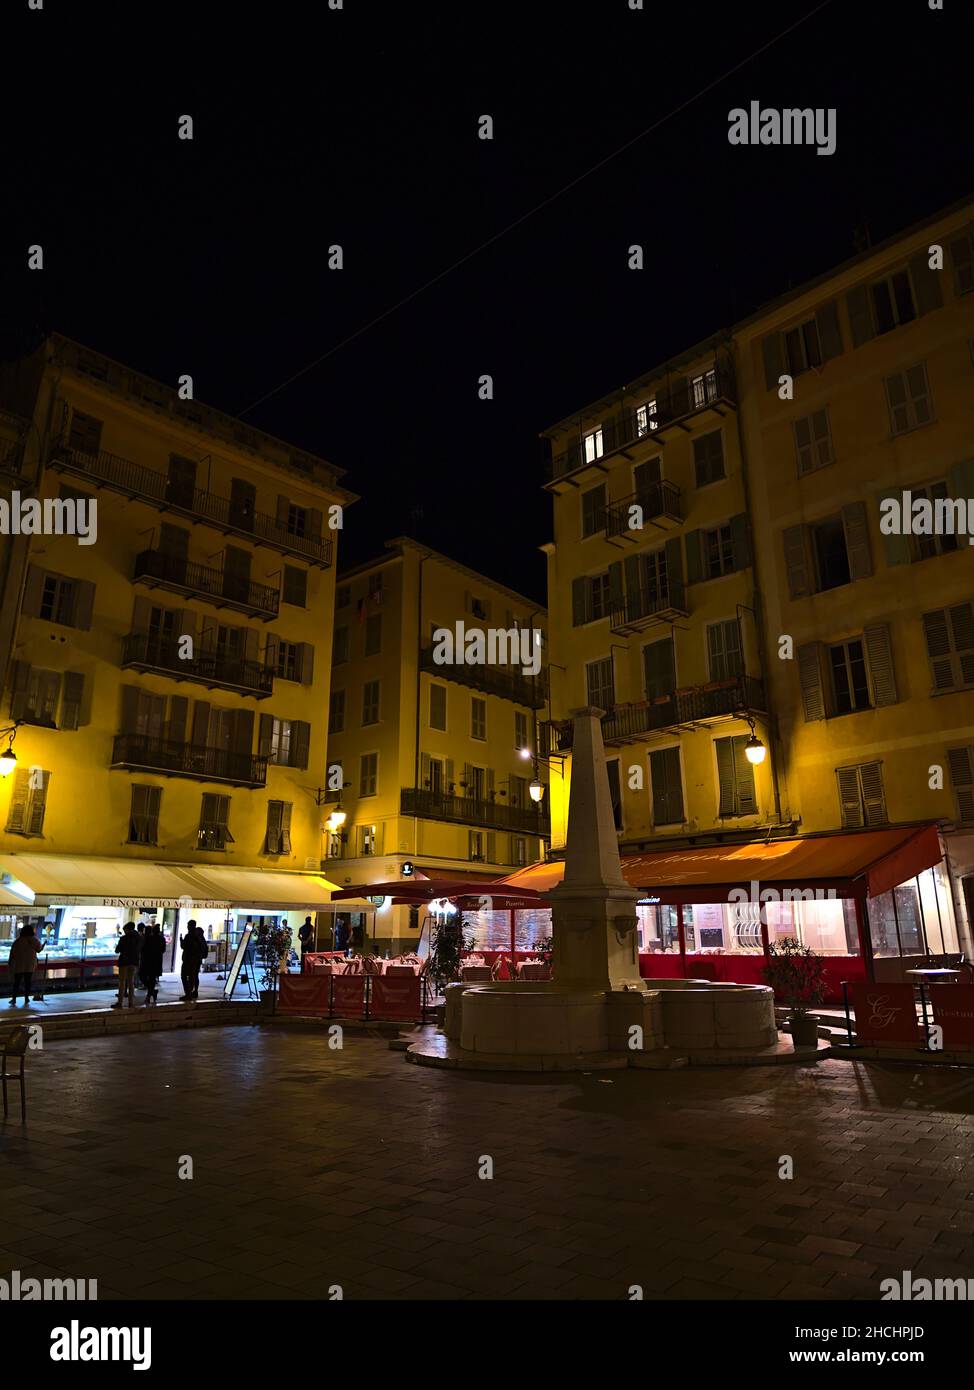 Night scene at square Place Rossetti in the historic center of city Nice, France at the French Riviera with illuminated old buildings and shops. Stock Photo